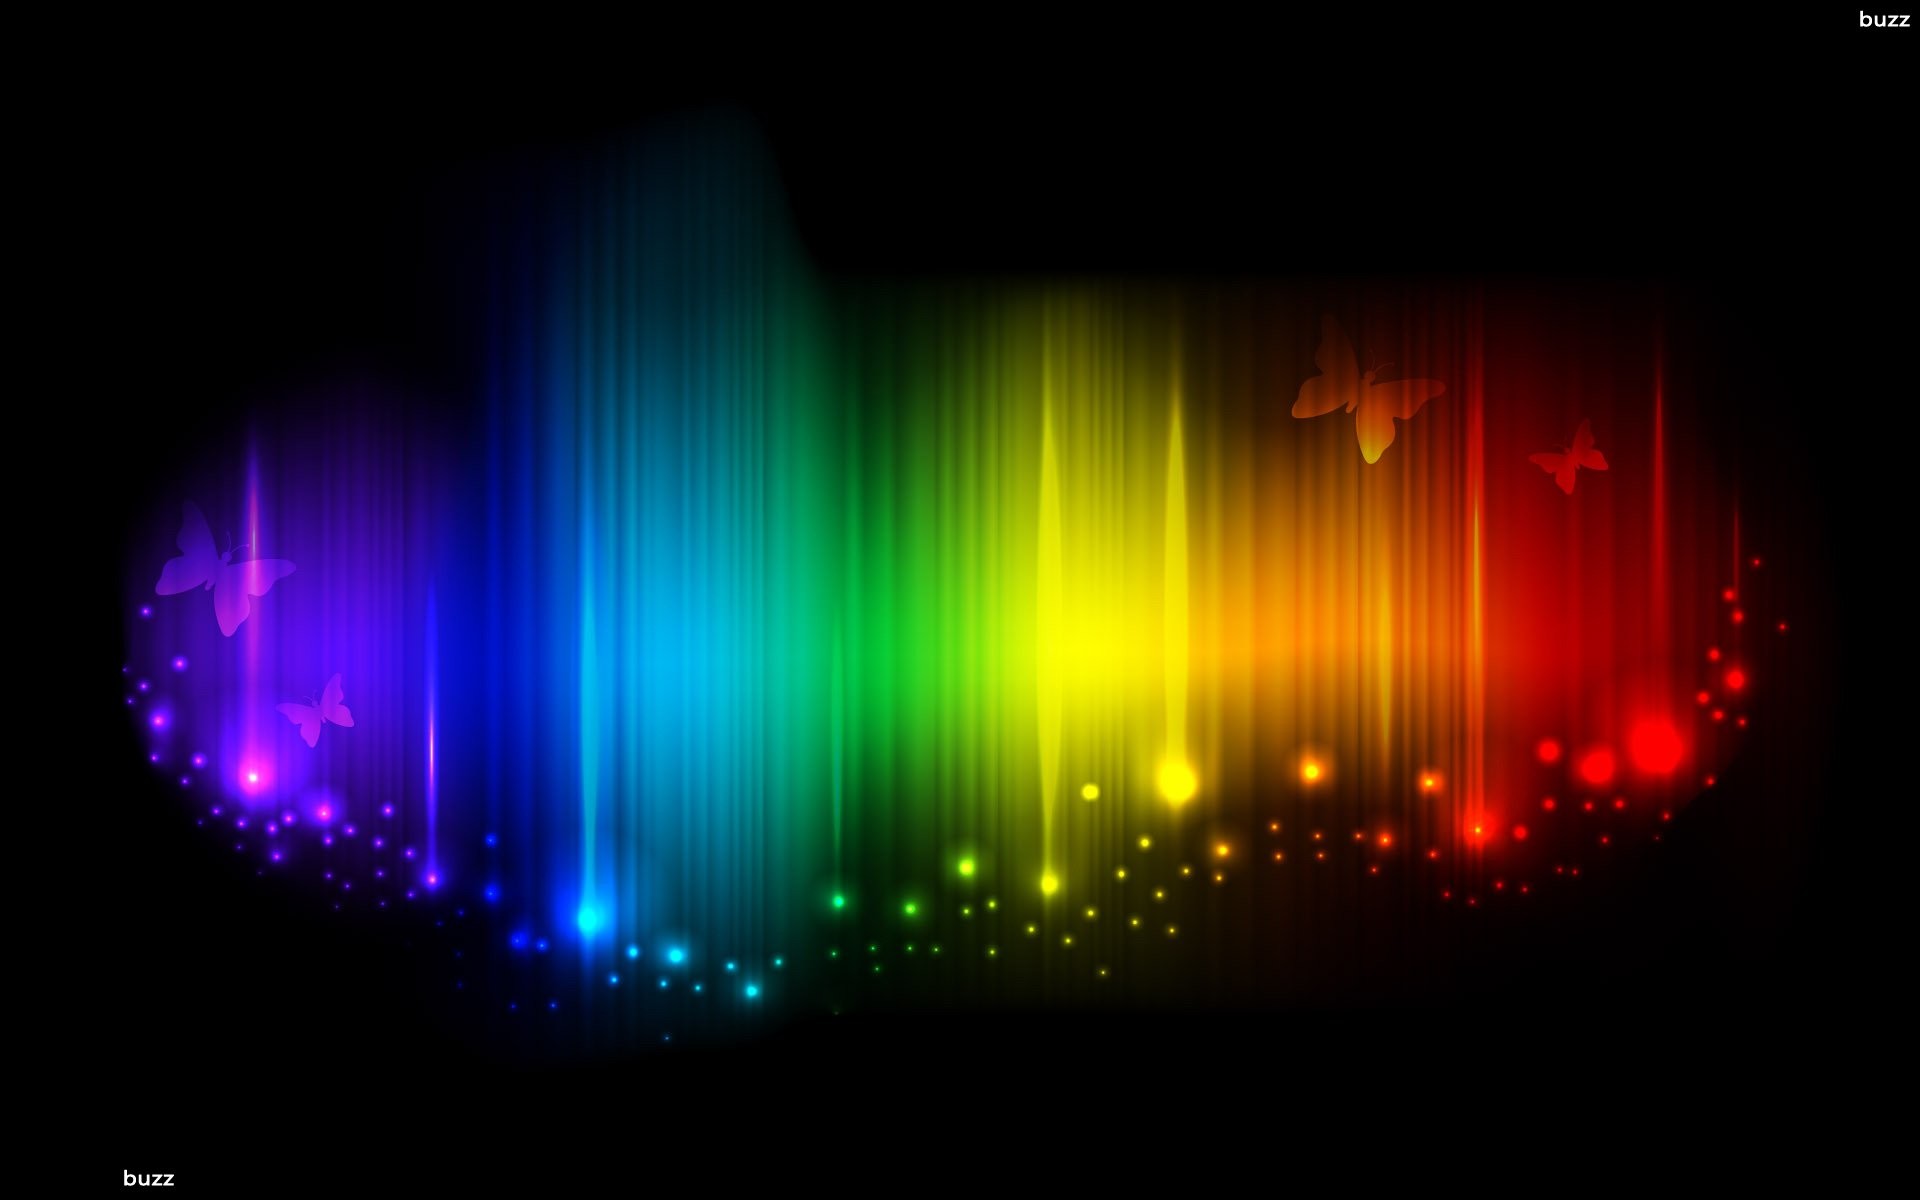 Abstract Backgrounds The Colours of Rainbow – Rainbow Colors Abstract Backgrounds 45